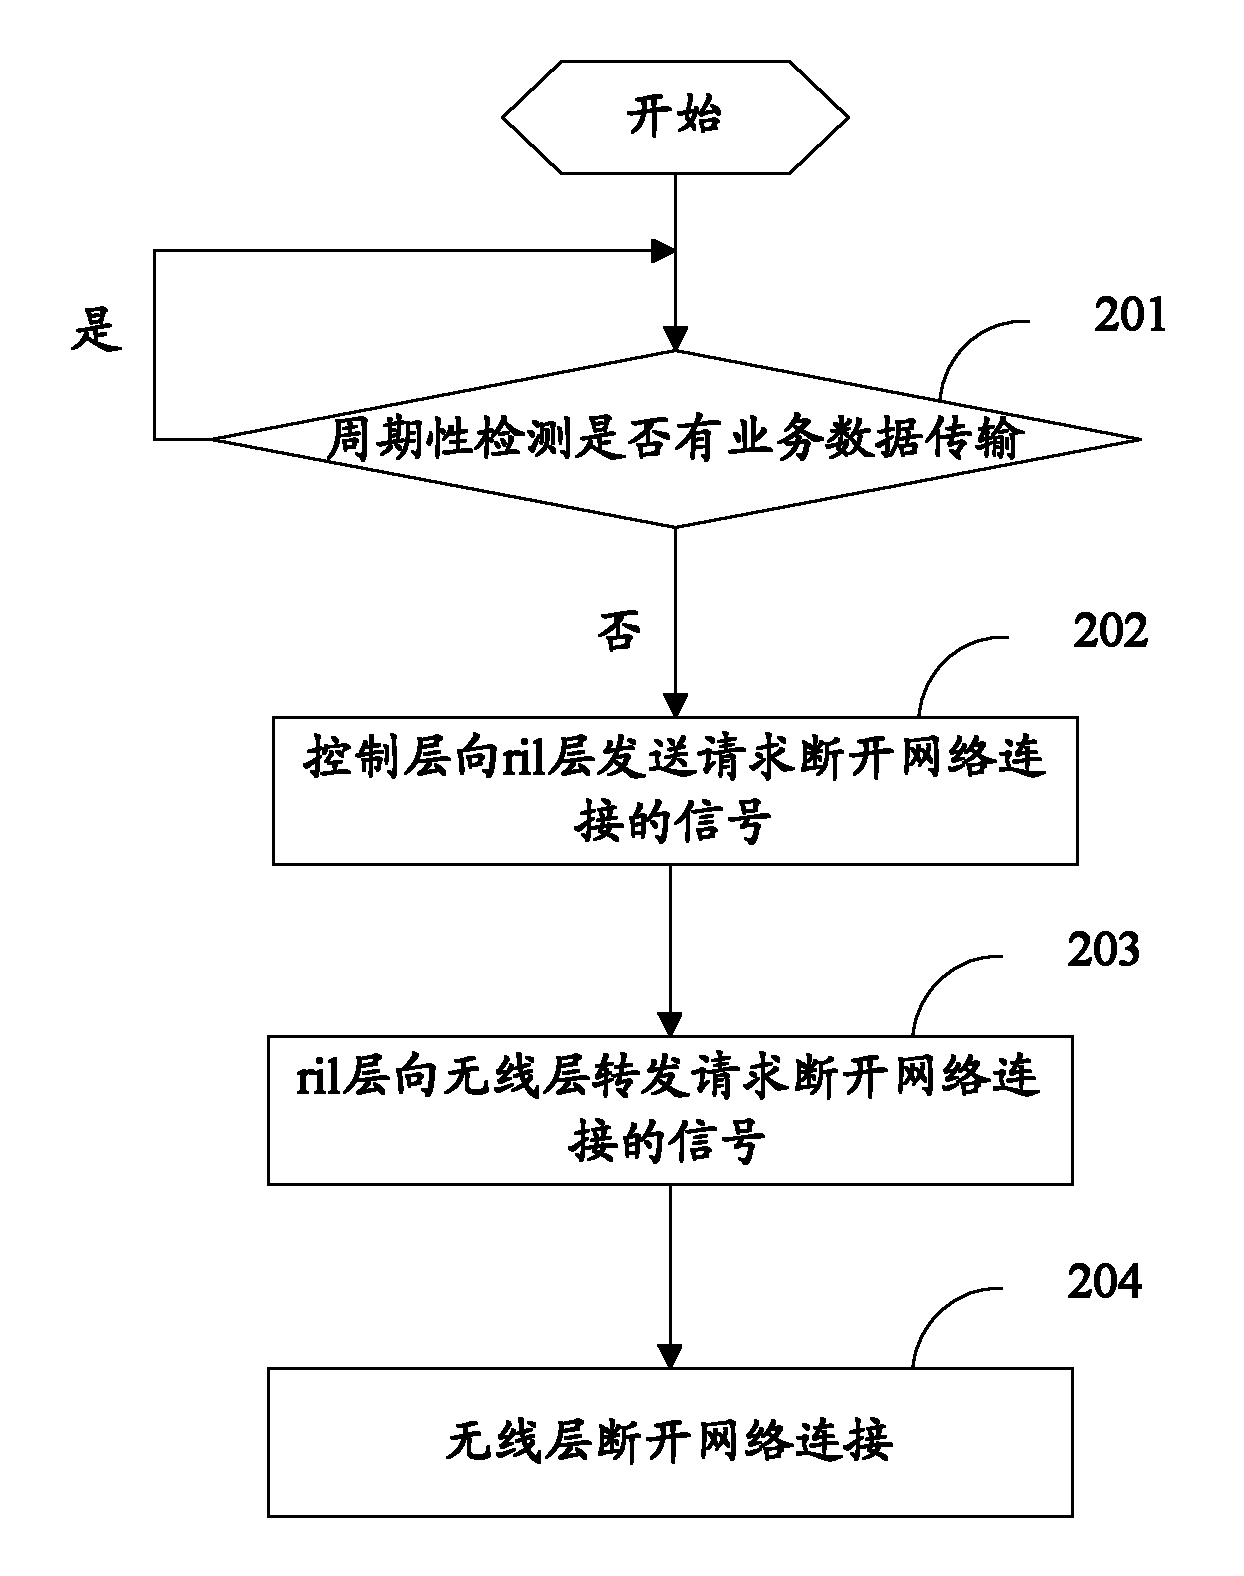 Method and device for controlling connection/disconnection of data link